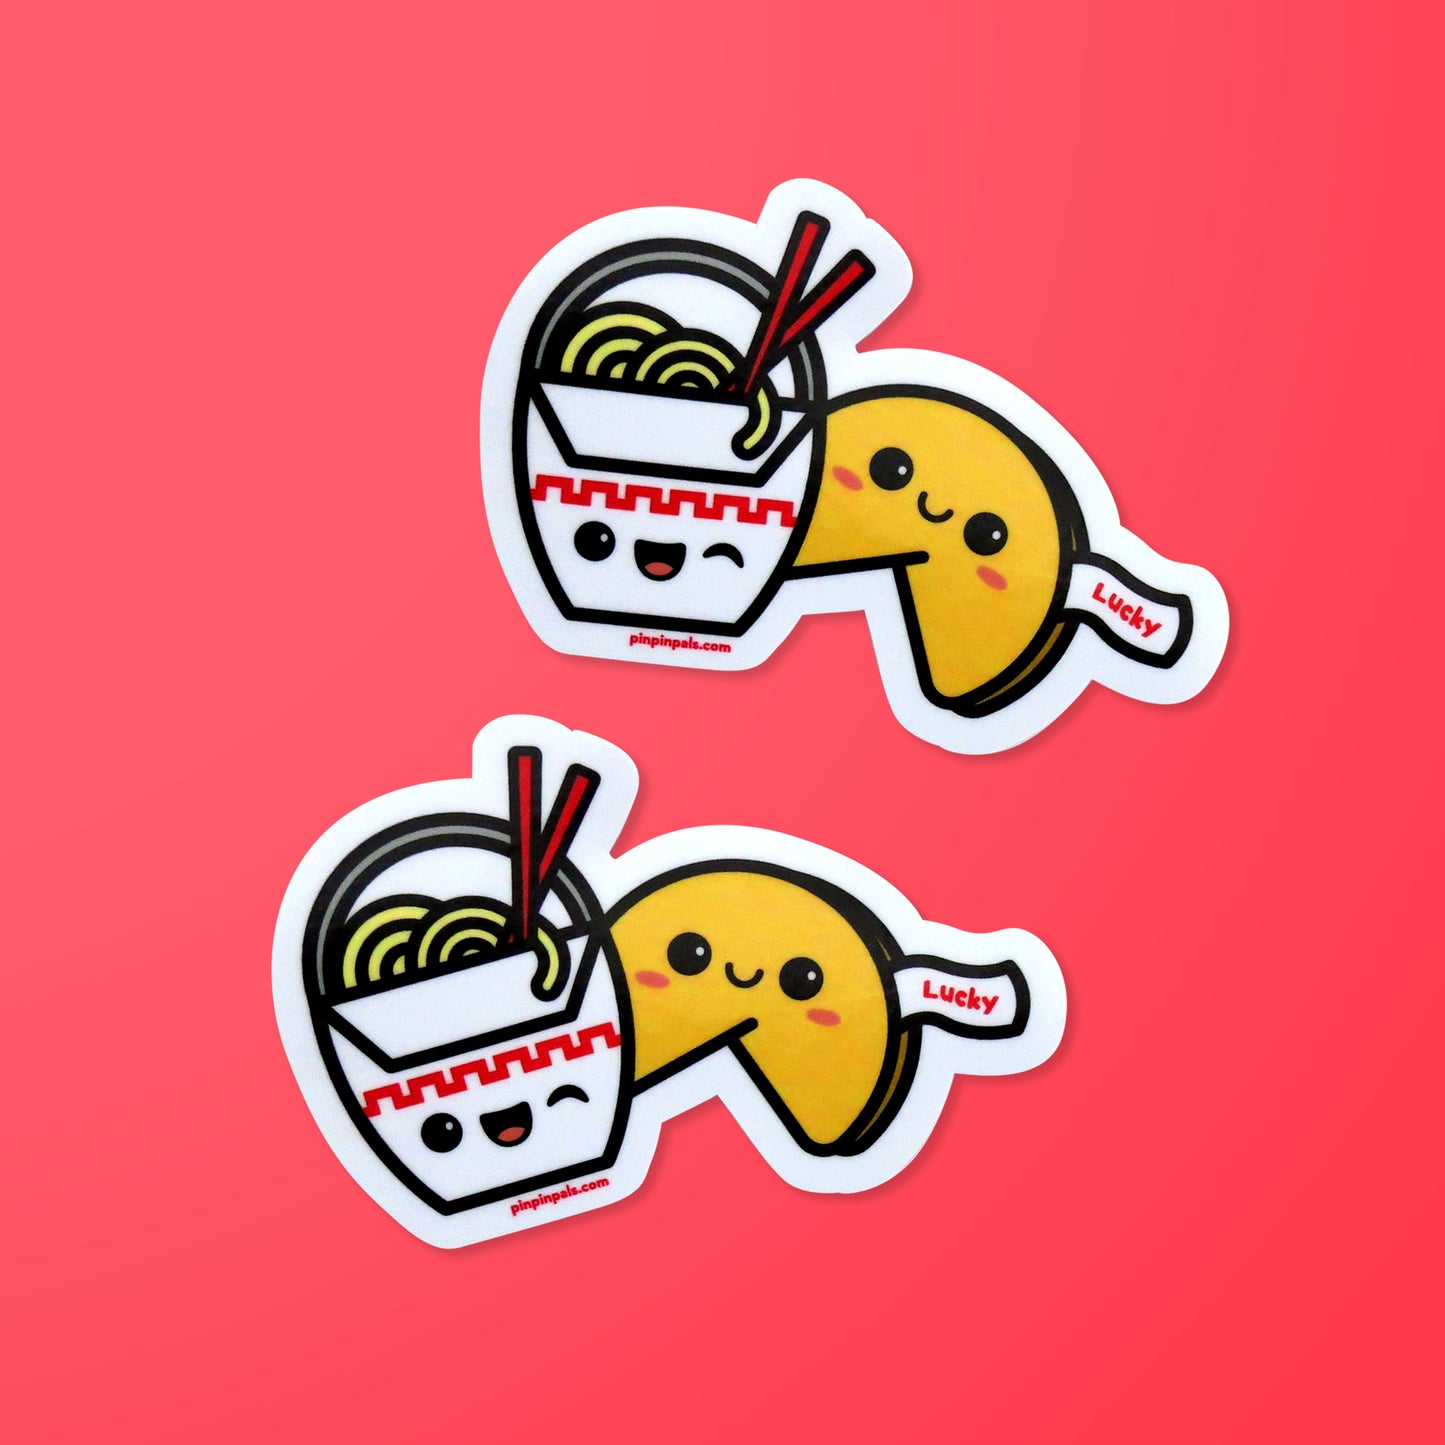 Two Chinese Takeout and Fortune Cookie vinyl stickers on red background